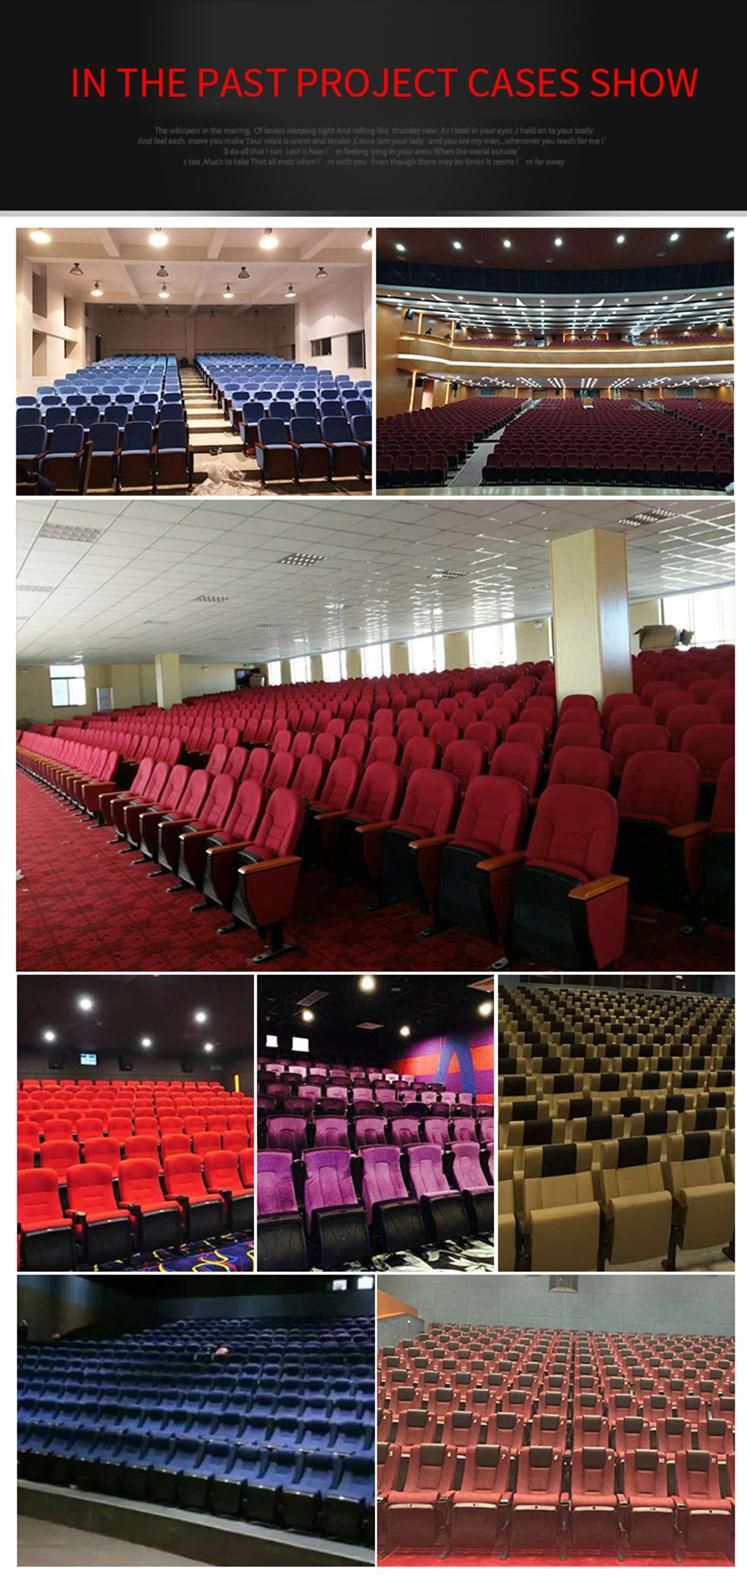 Luxury Home Triple Theater Cinema VIP Seat Padded Chair College Ladder Room School Auditorium Chairs